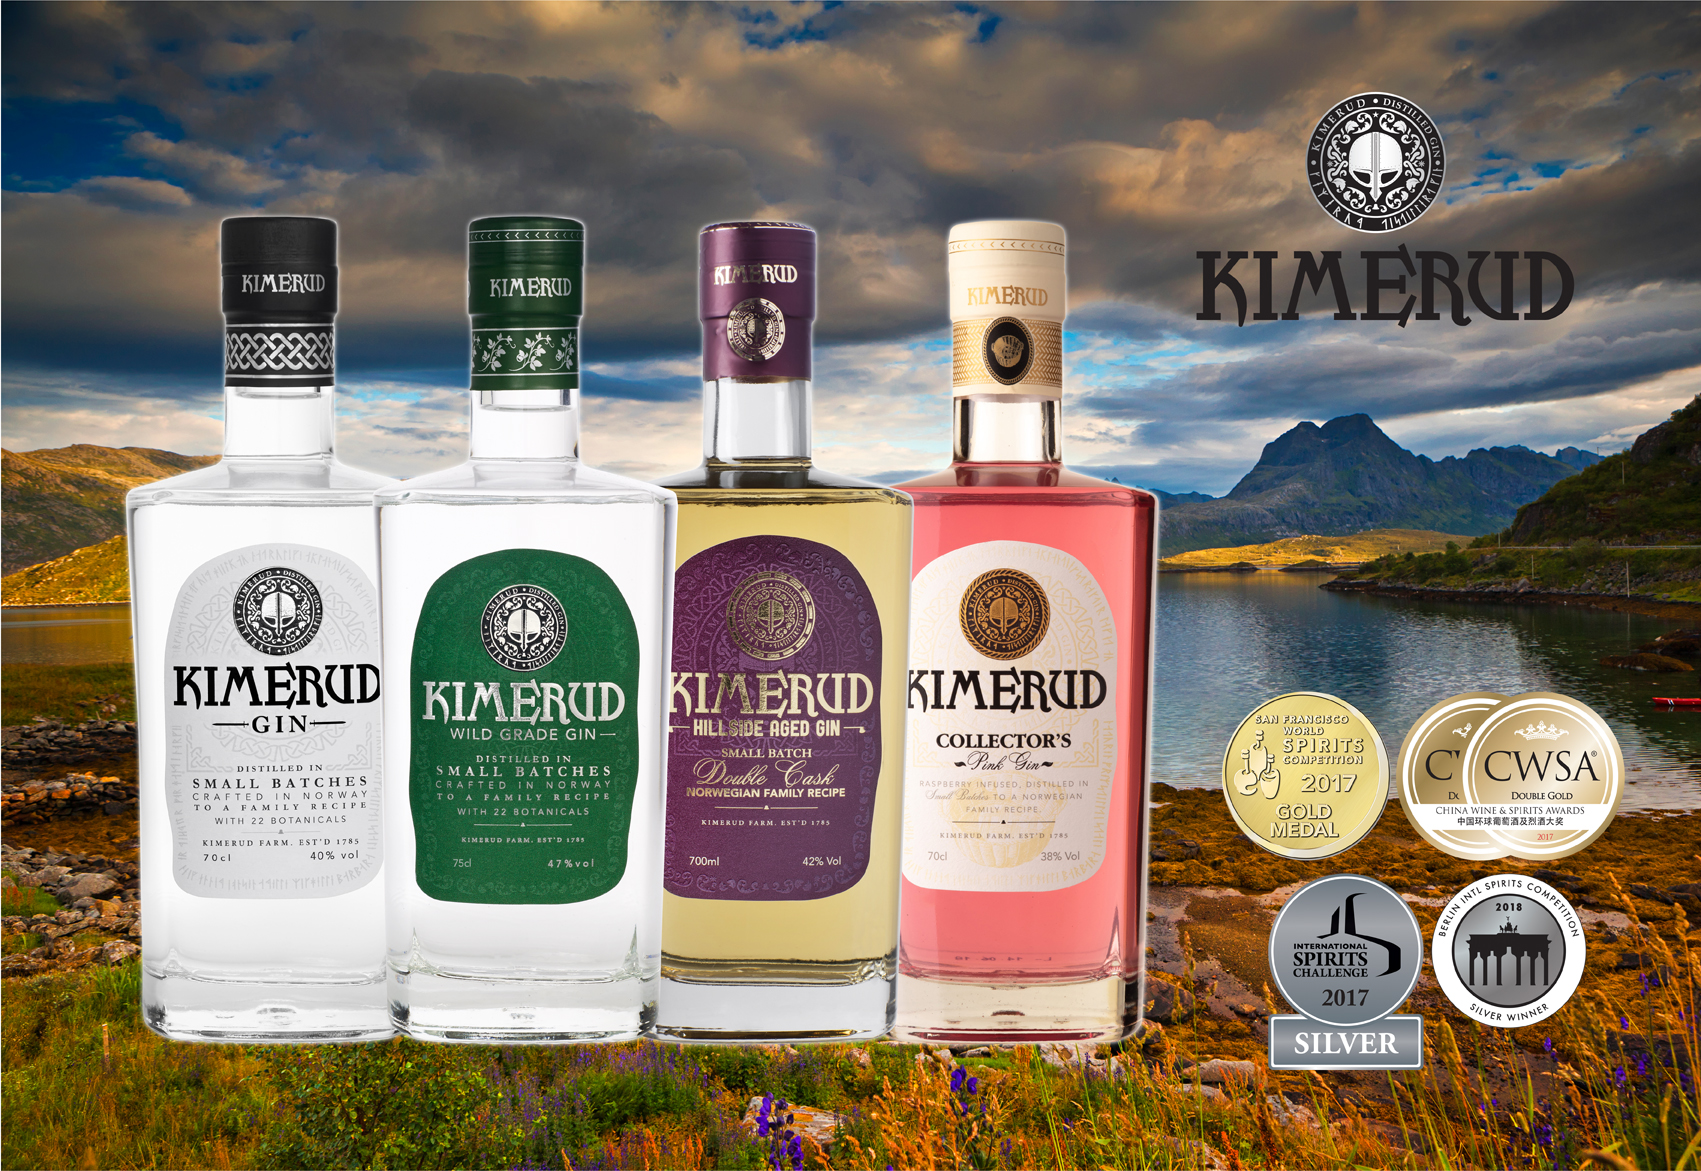 Kimerud Gin from Norway